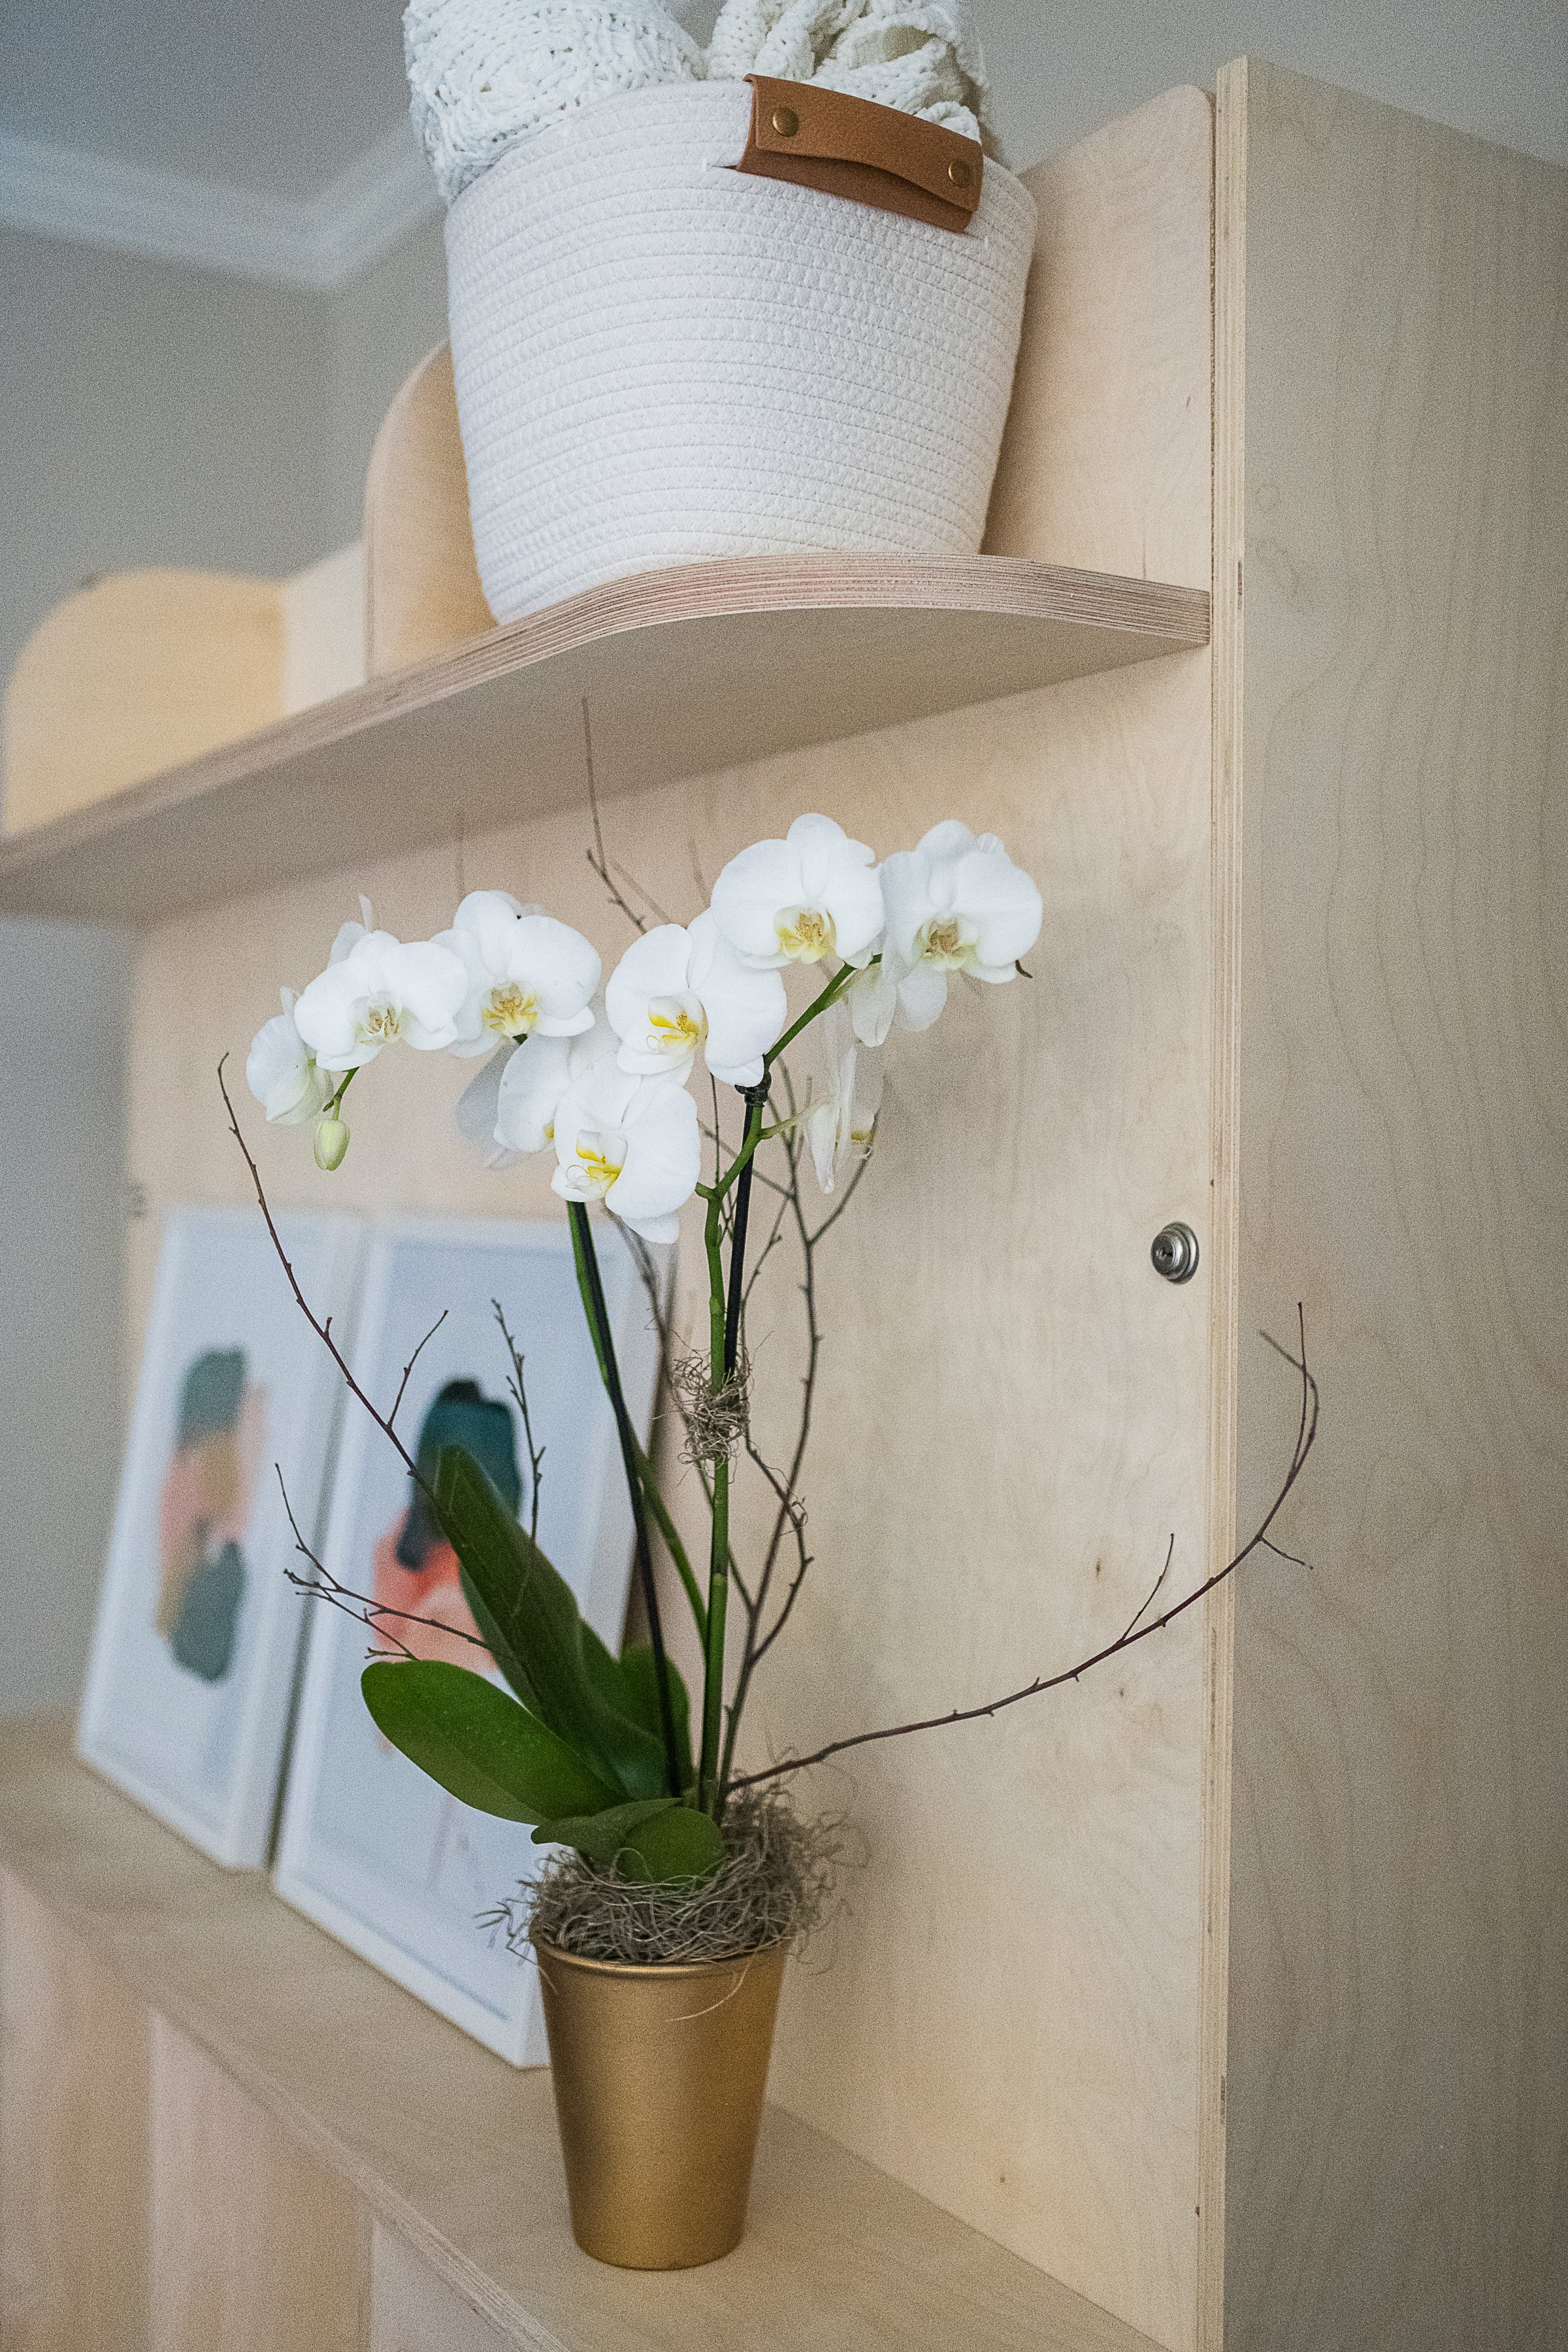 Closed vertical murphy bed with flowers on the shelf